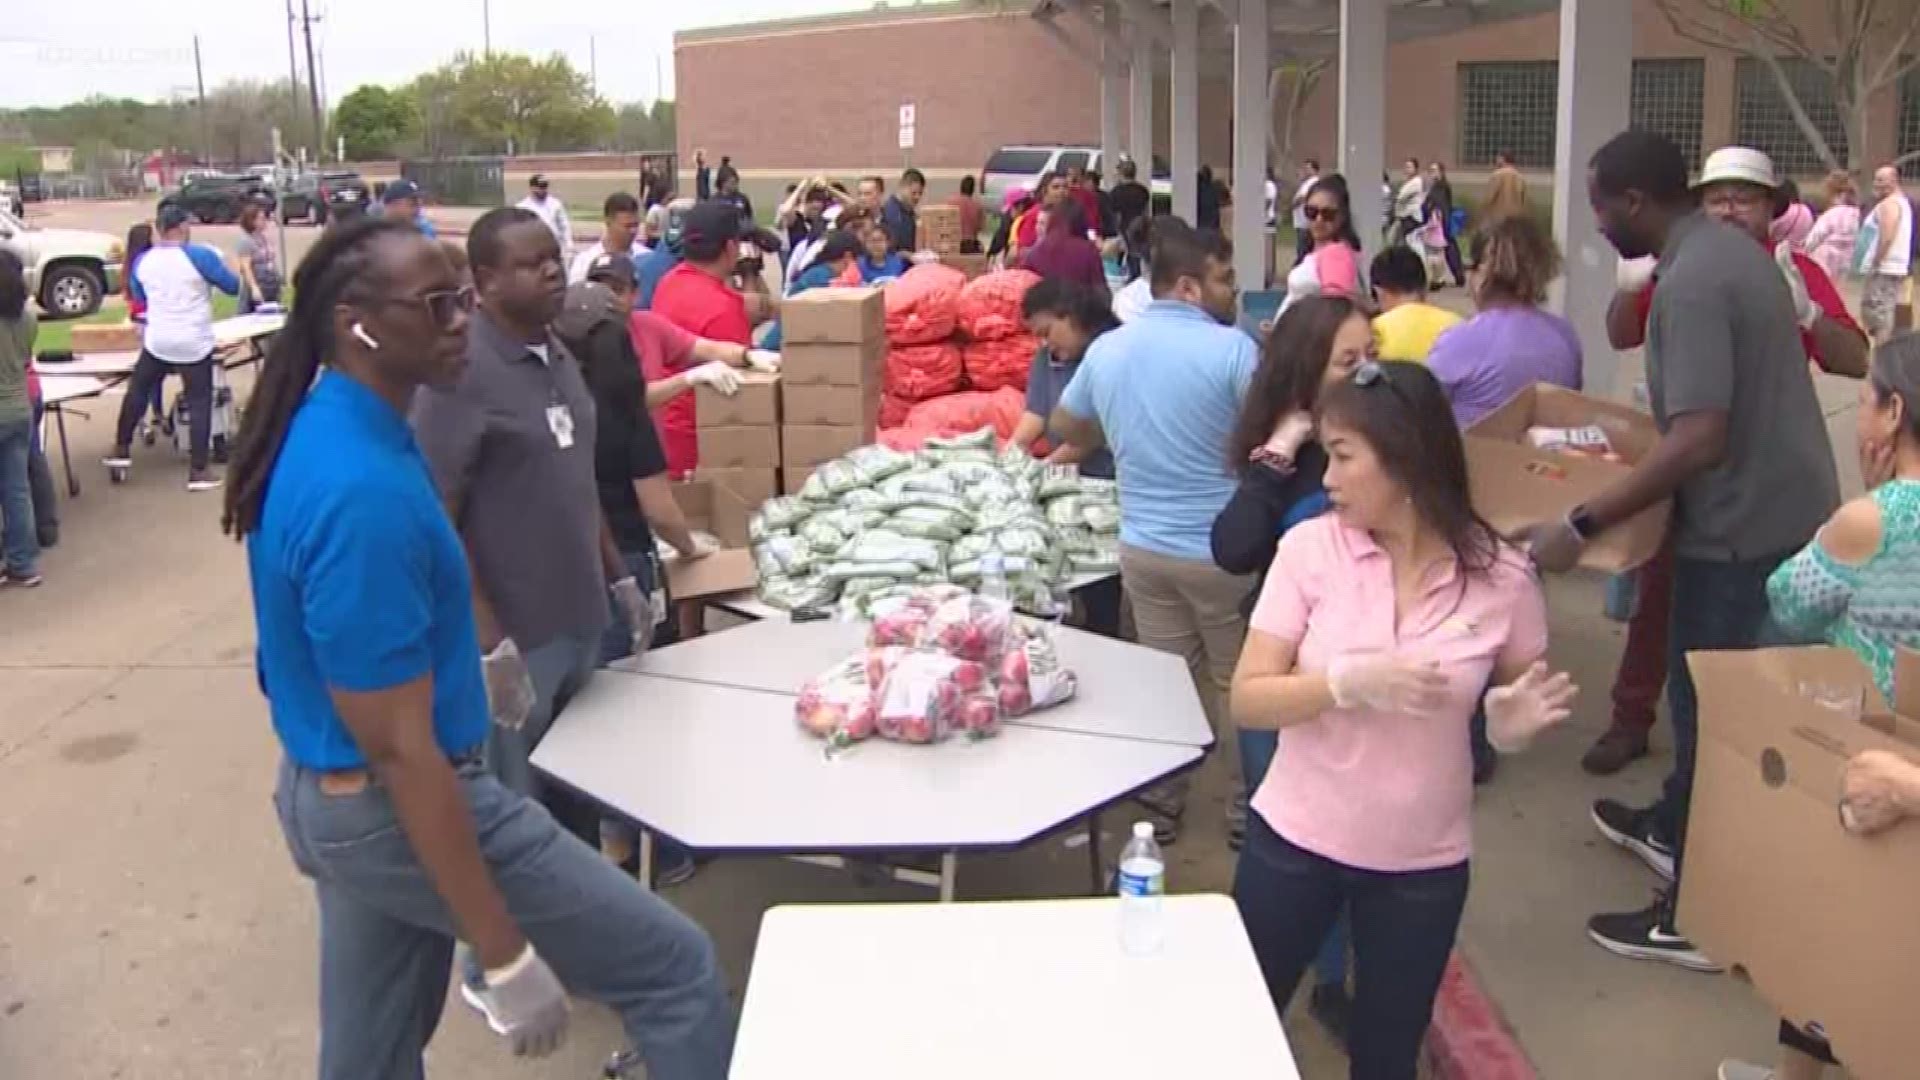 Hundreds of families lined up Saturday morning at Chavez High School as volunteers with Houston ISD and the Houston Food Bank teamed up to give out free food.